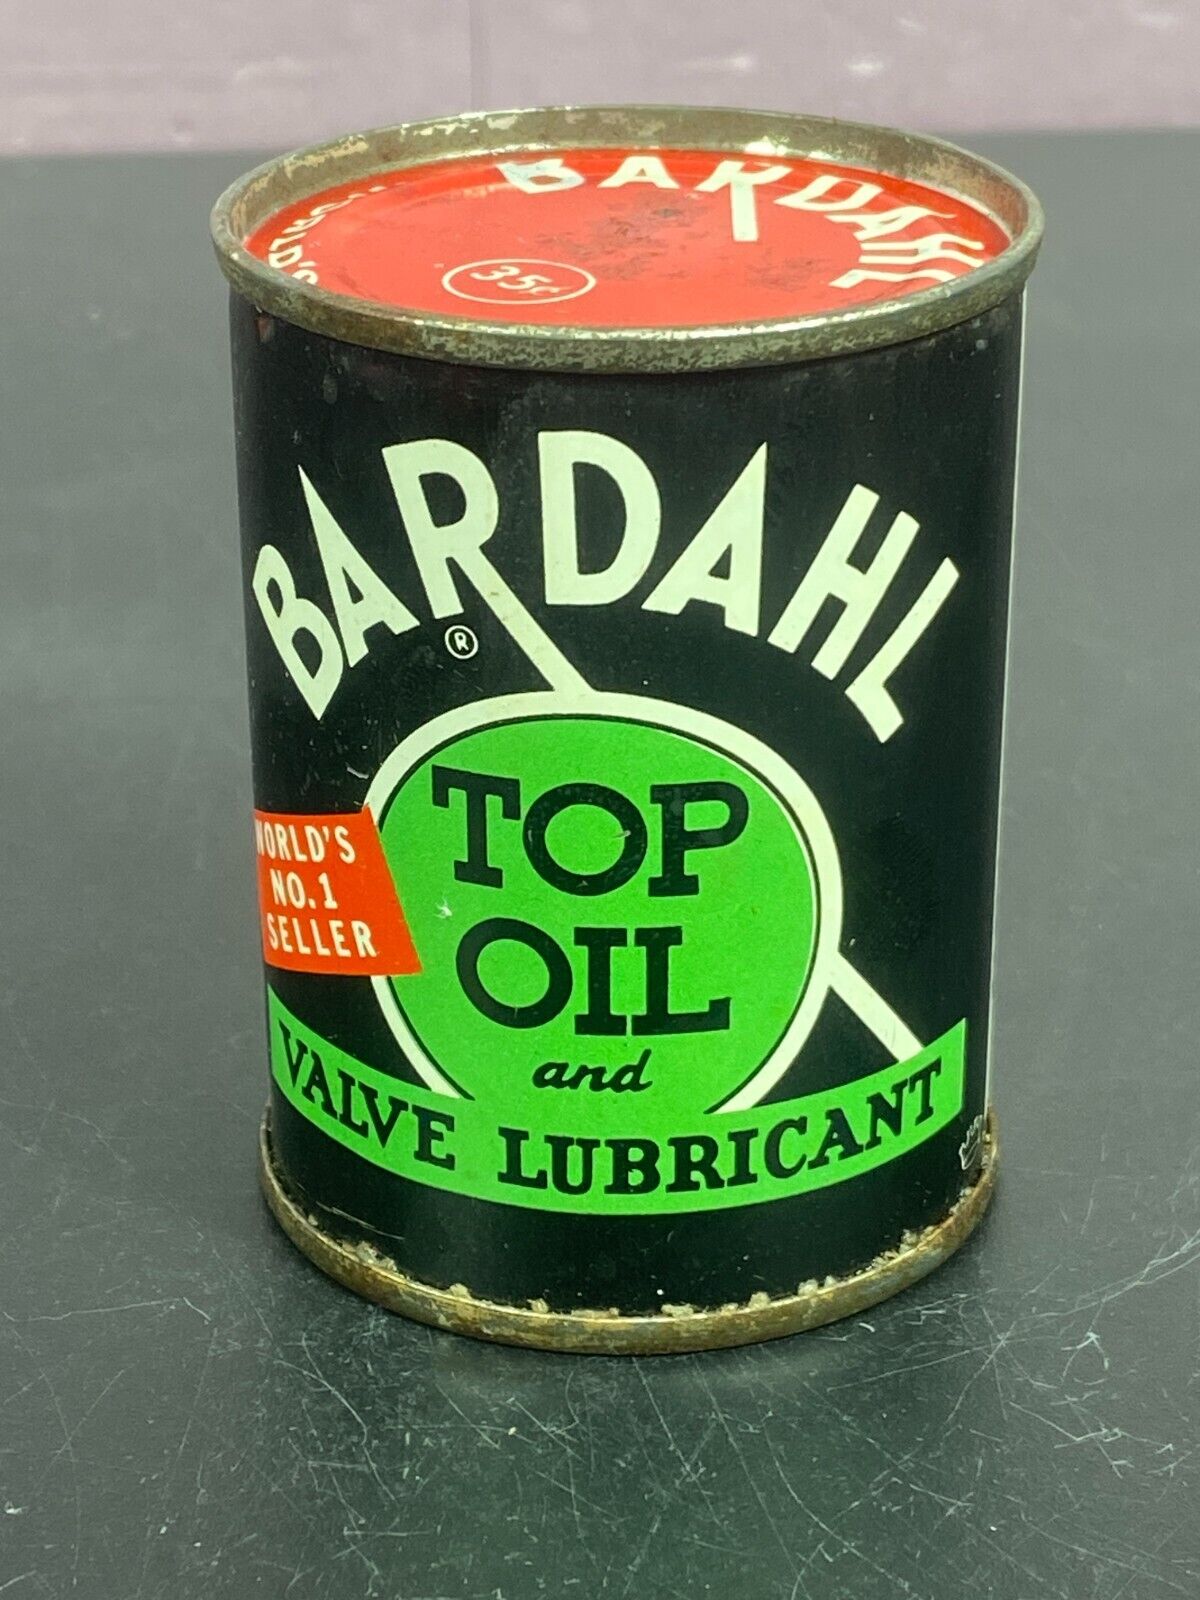 Bardahl Top Oil and Valve Lubricant Full Can Original Vintage .35 cents Read